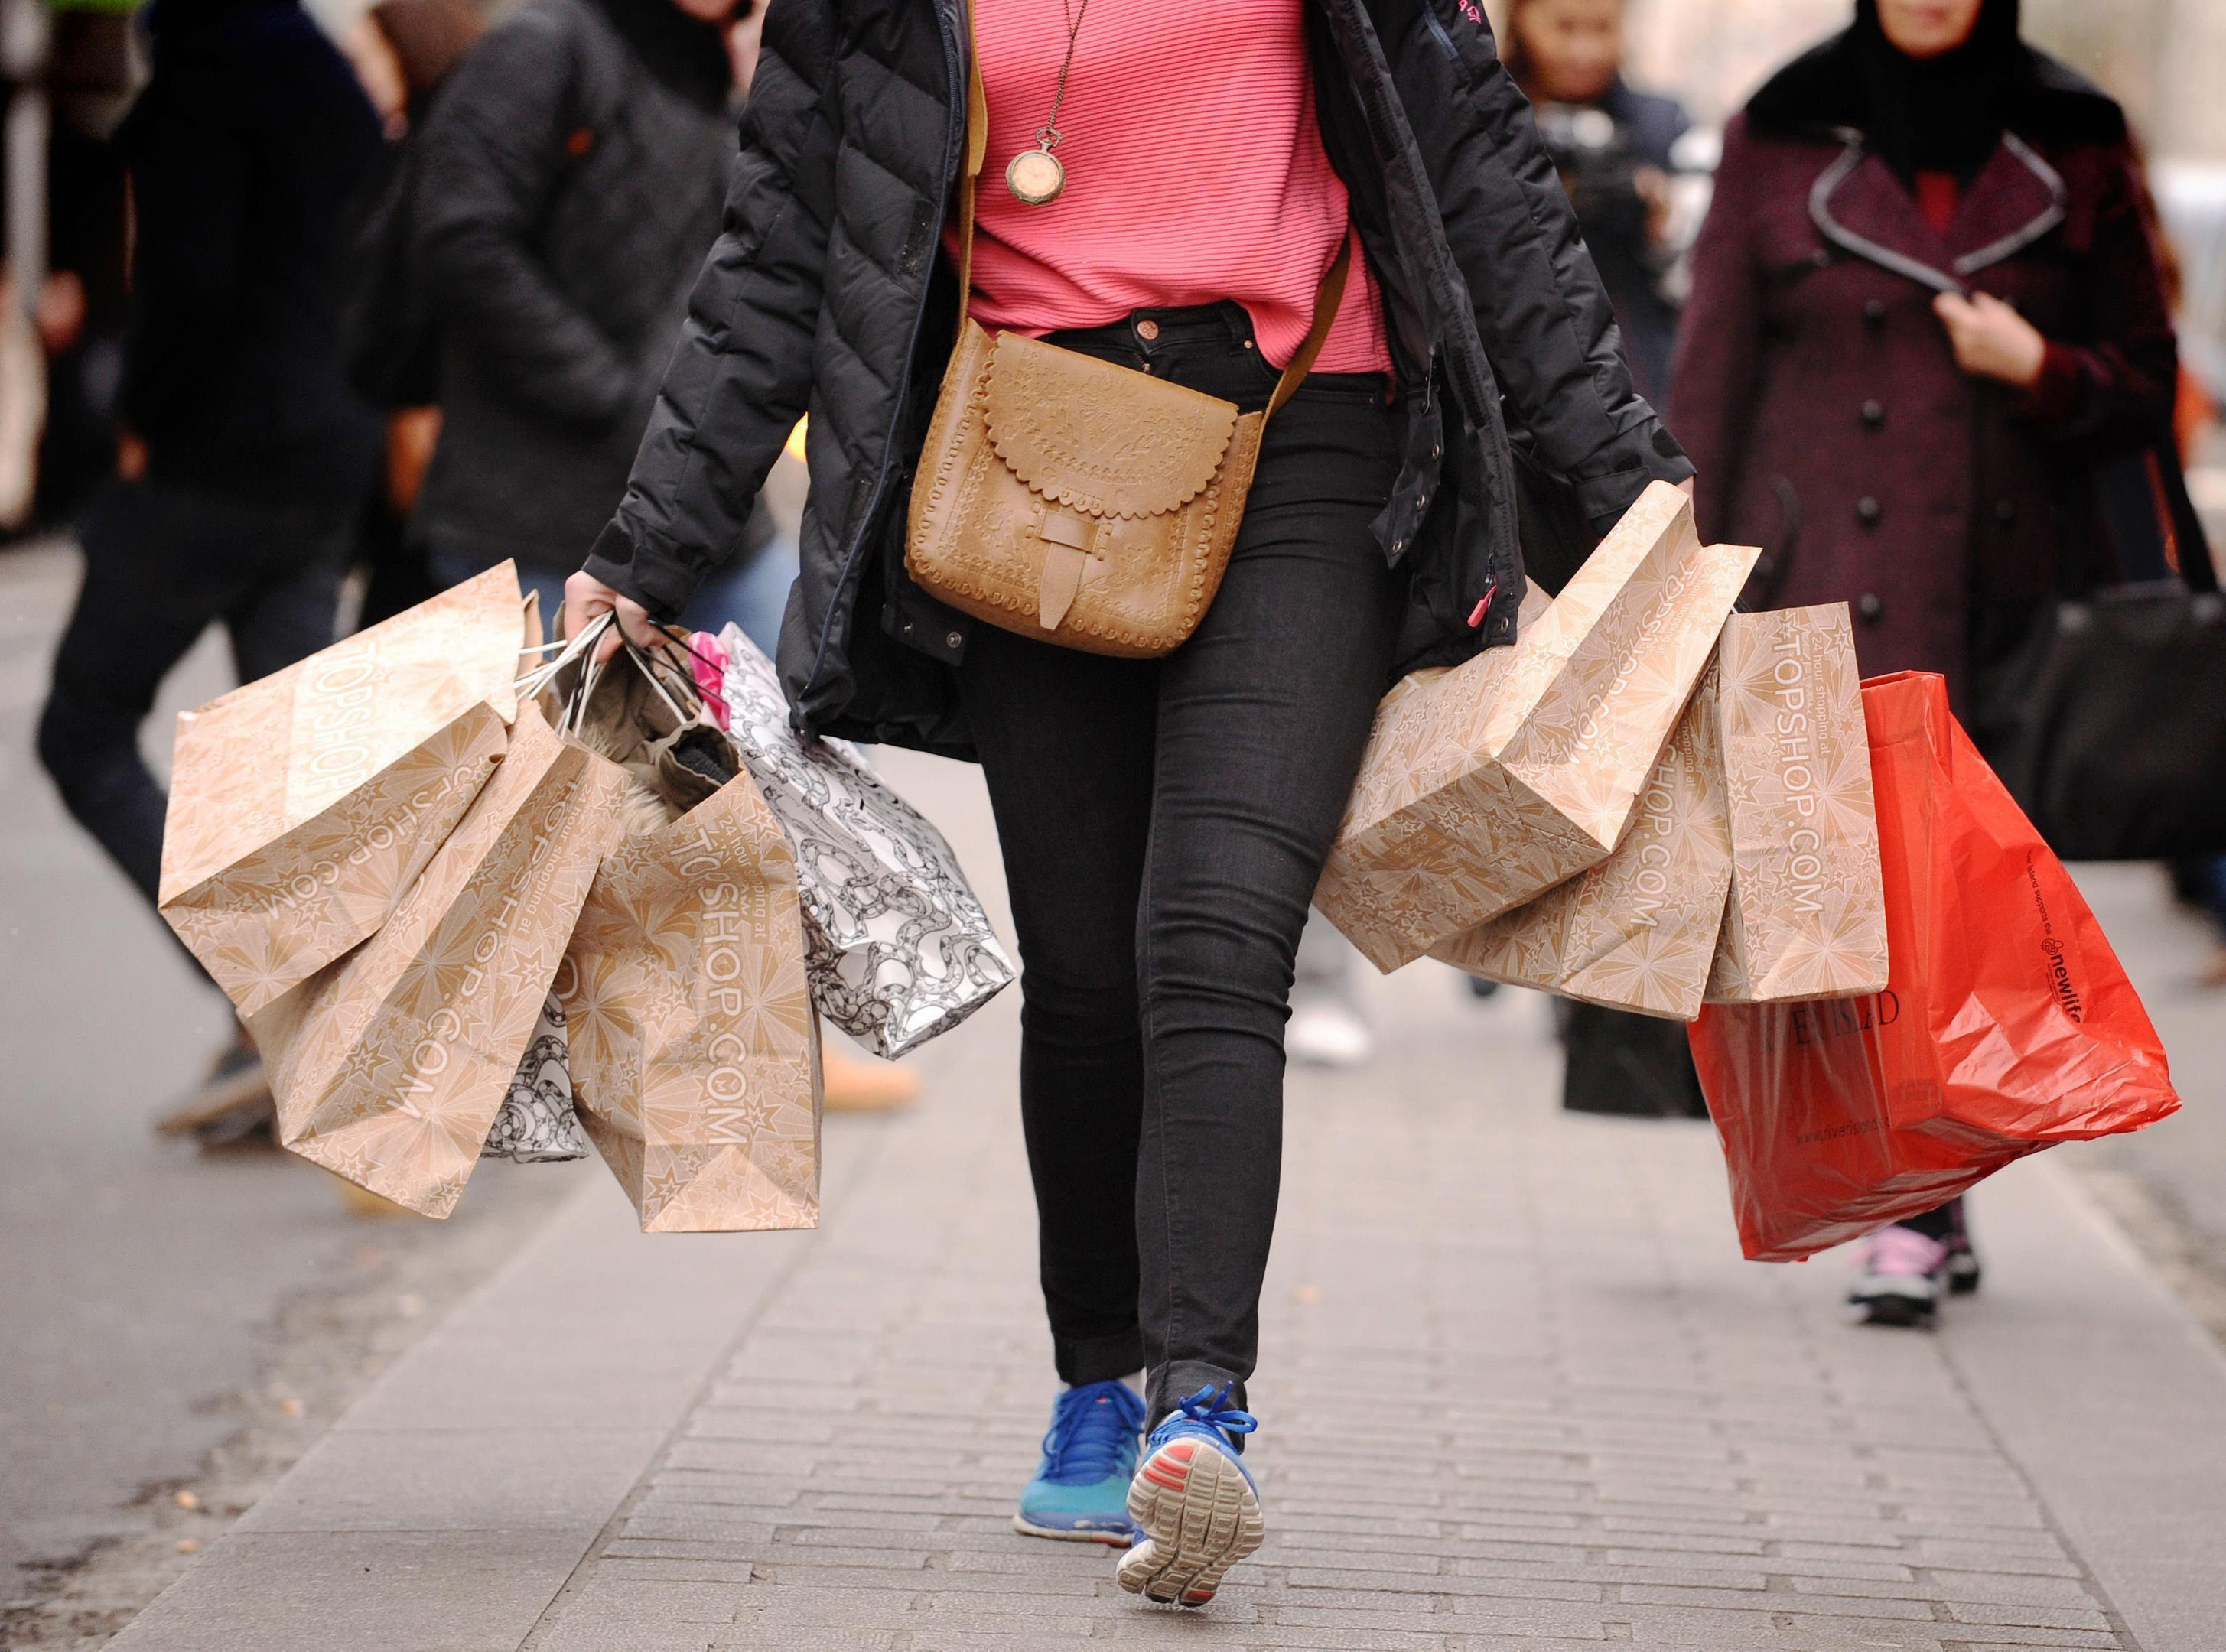 British families will spend an average £821.25 on gifts, food and drink and decorations, up 1.3% on last year and 54% more than the European average of £532 (Euros 612.90), according to figures from VoucherCodes and the Centre for Retail Research (CRR). (Dominic Lipinski/PA Wire)